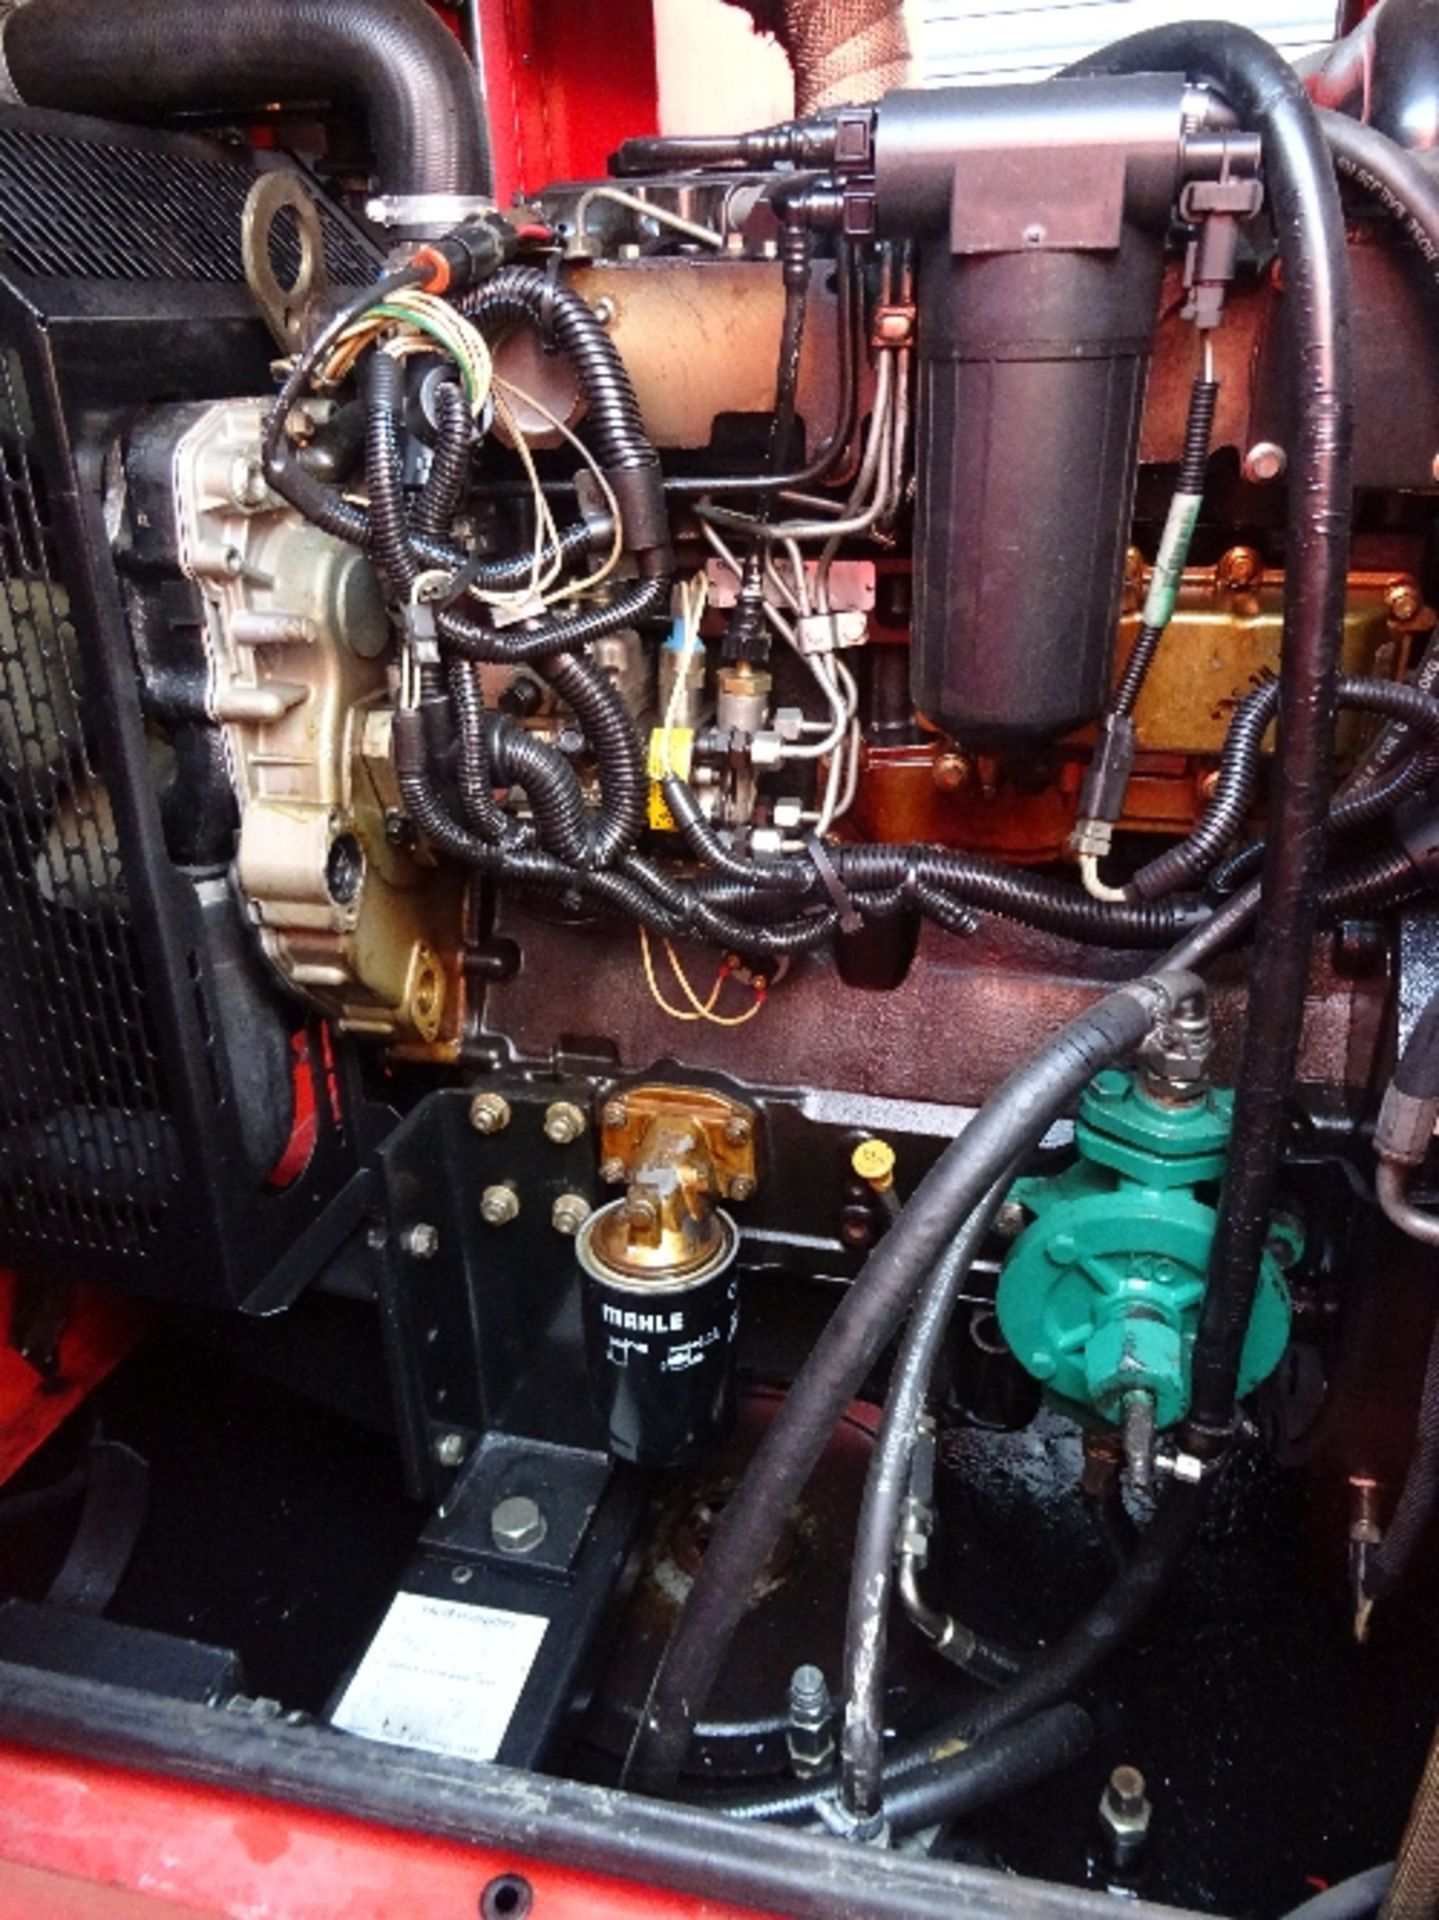 FG Wilson 60kva generator 31038 hrs - starts and runs - drive to alternator disconnected This lot is - Image 5 of 6